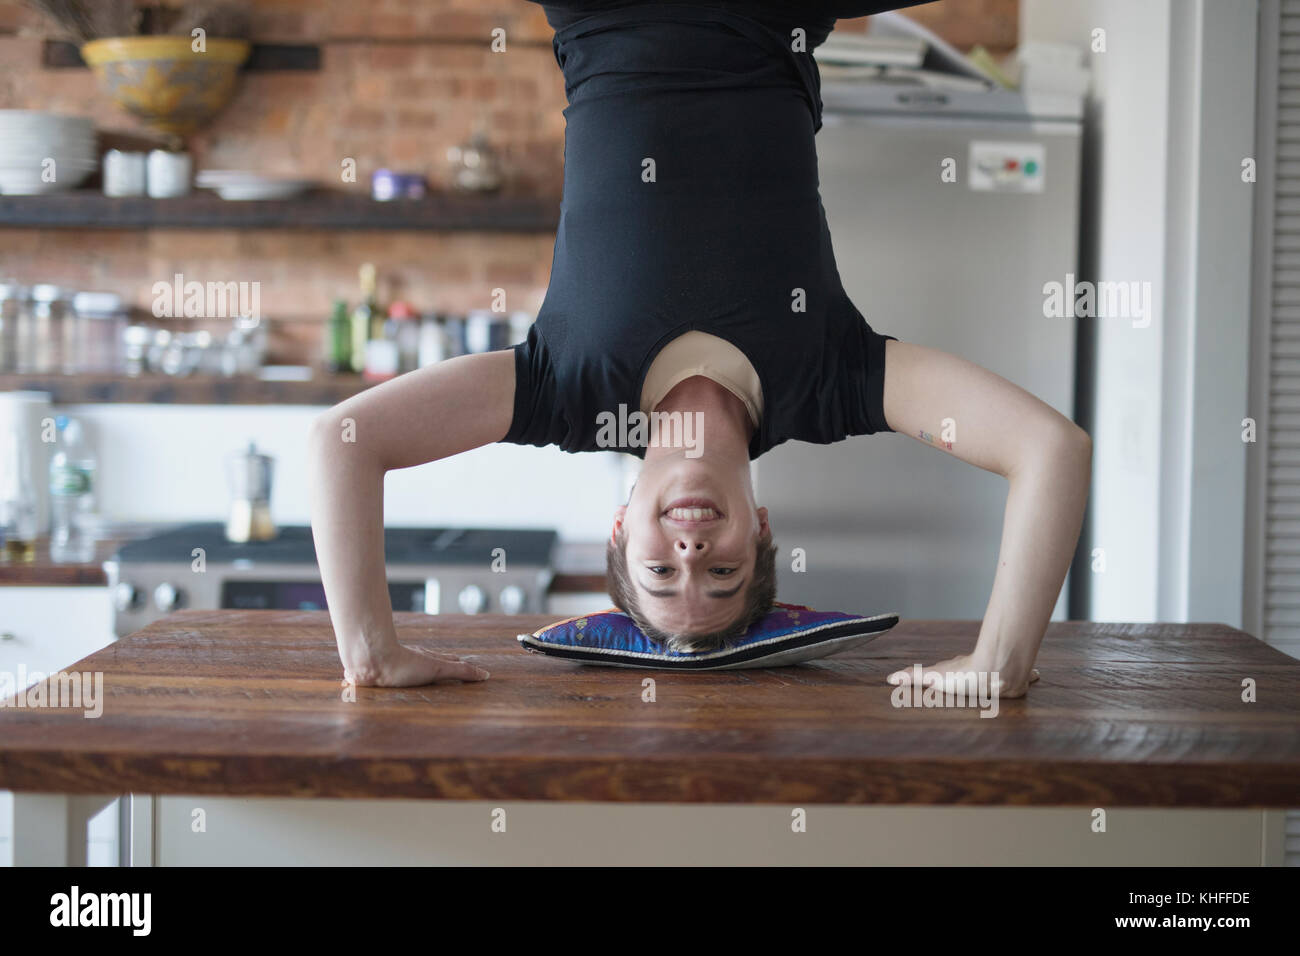 Transgender person doing a handstand on their kitchen counter Stock Photo